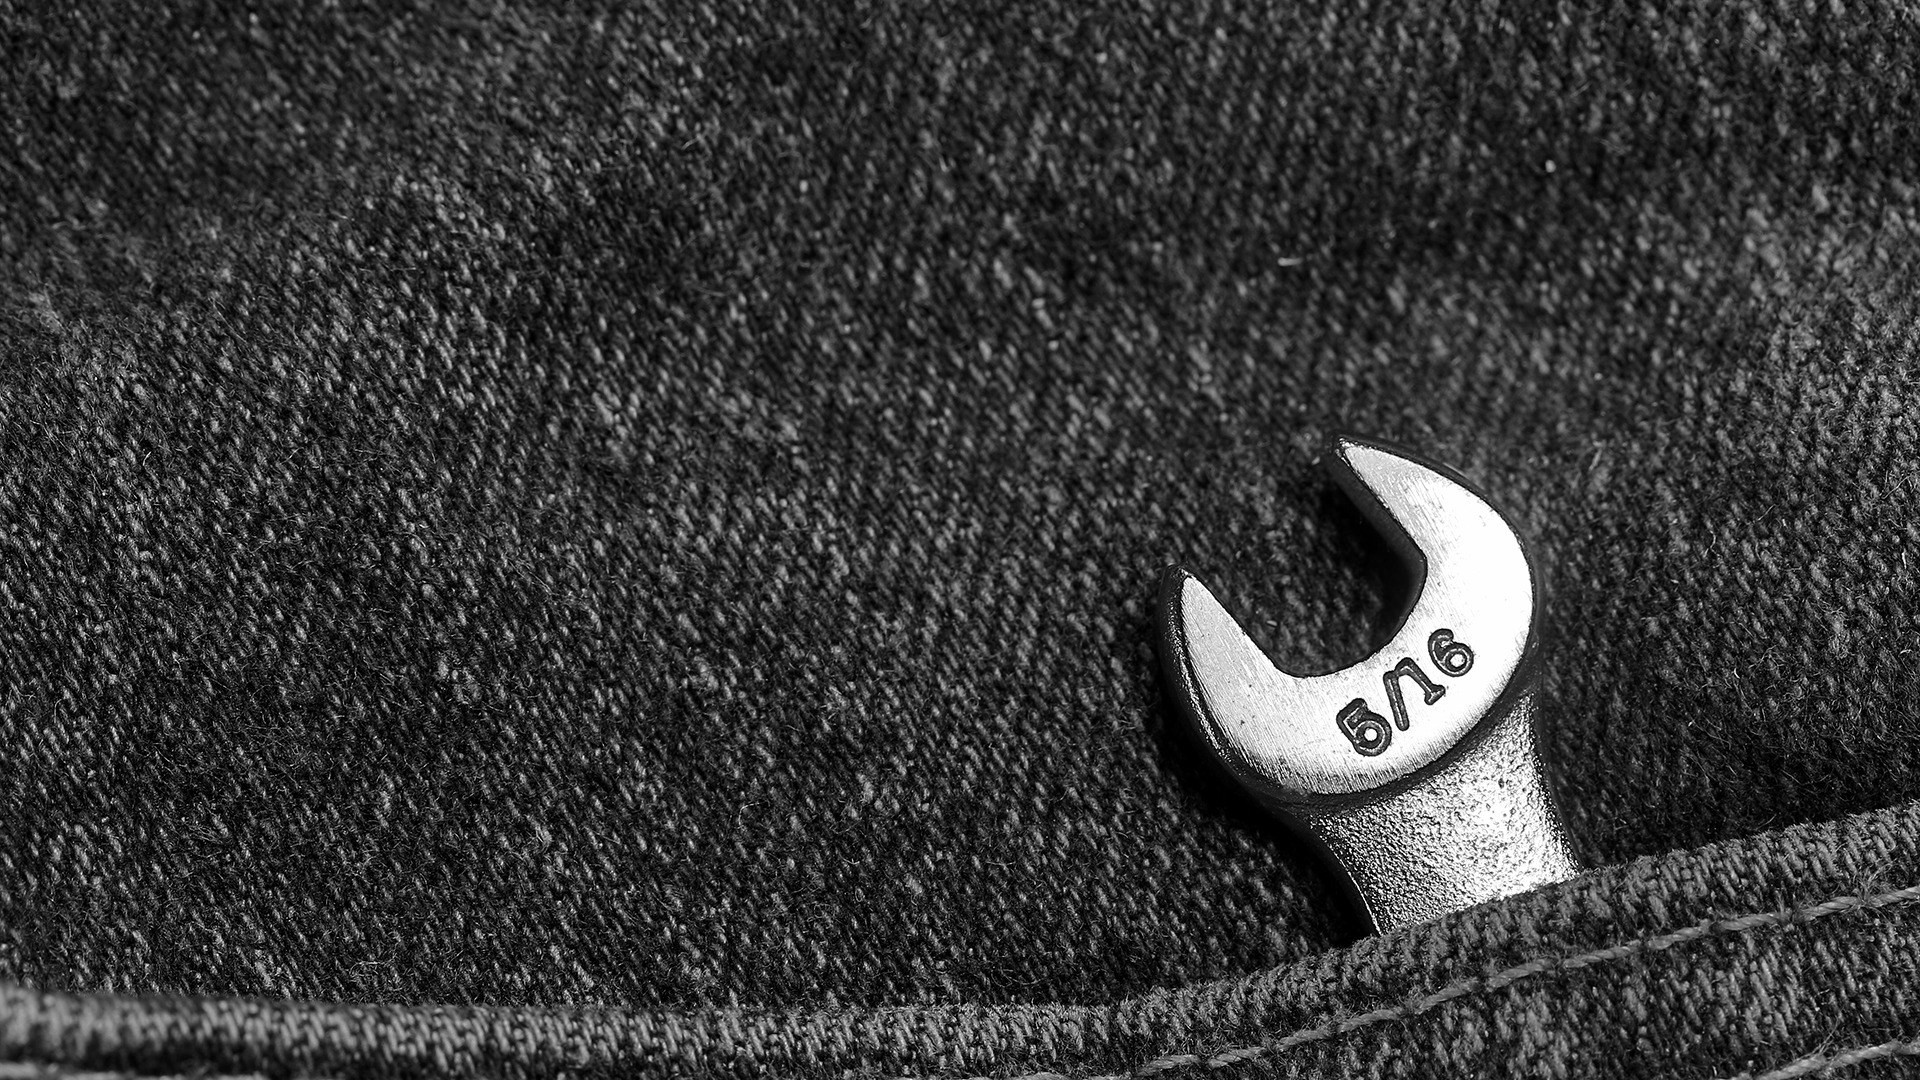 General 1920x1080 monochrome jeans metal numbers texture shiny wrench closeup tools